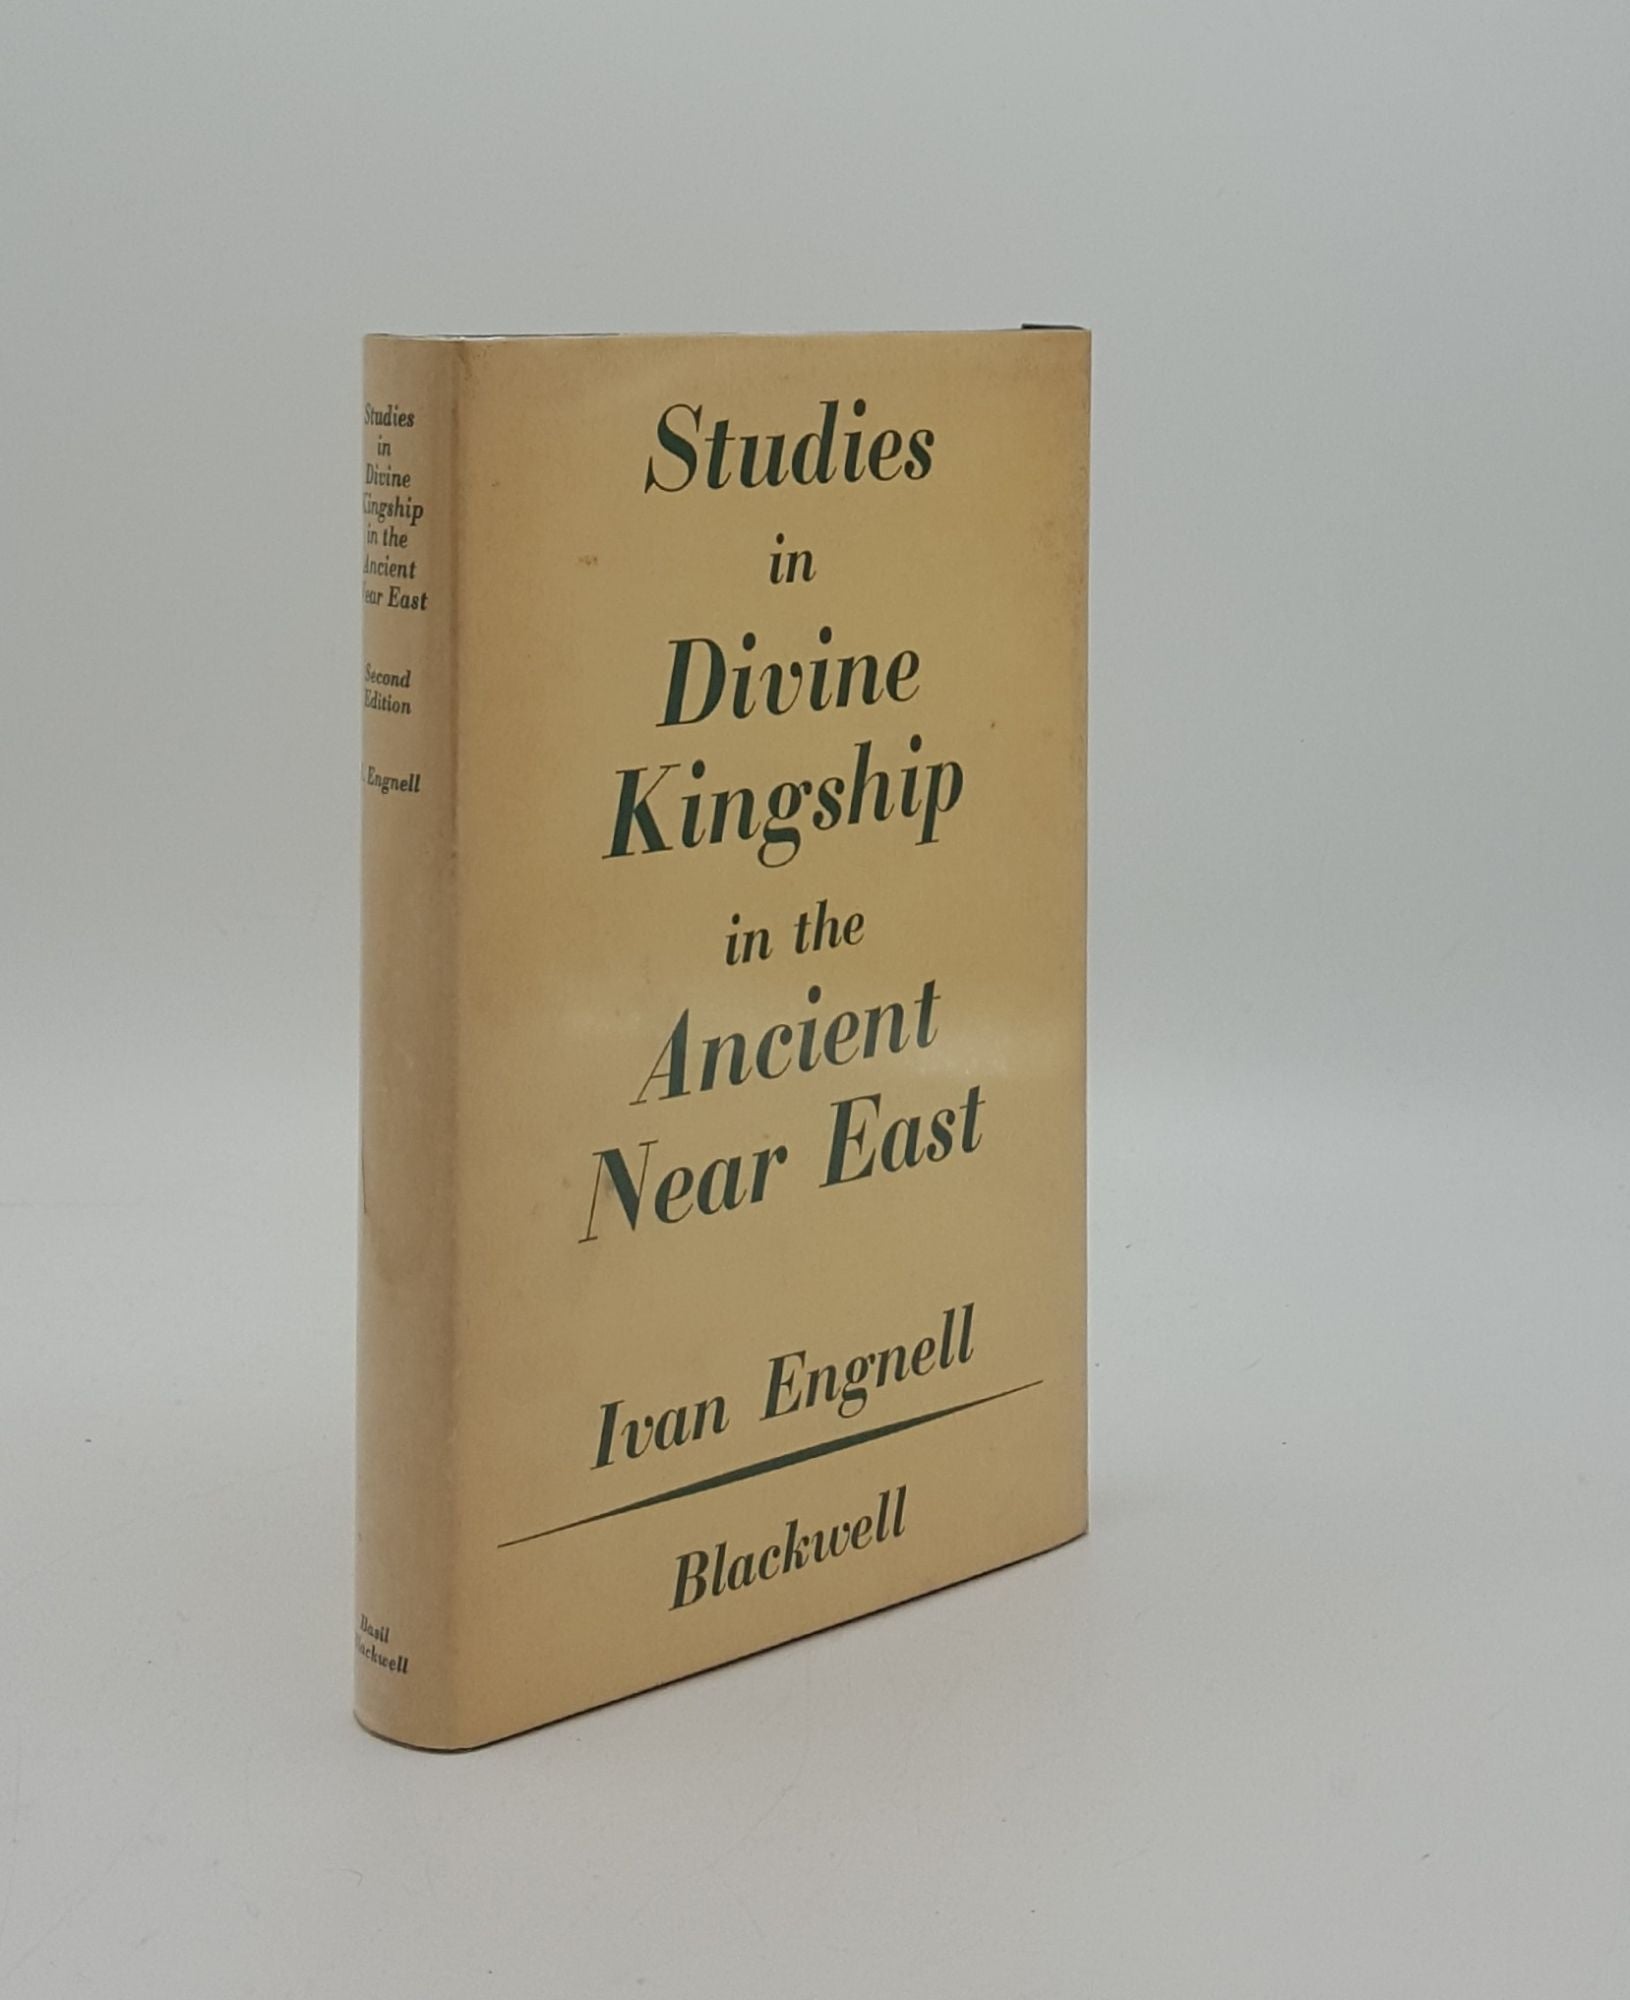 ENGNELL Ivan - Studies in Divine Kingship in the Ancient Near East